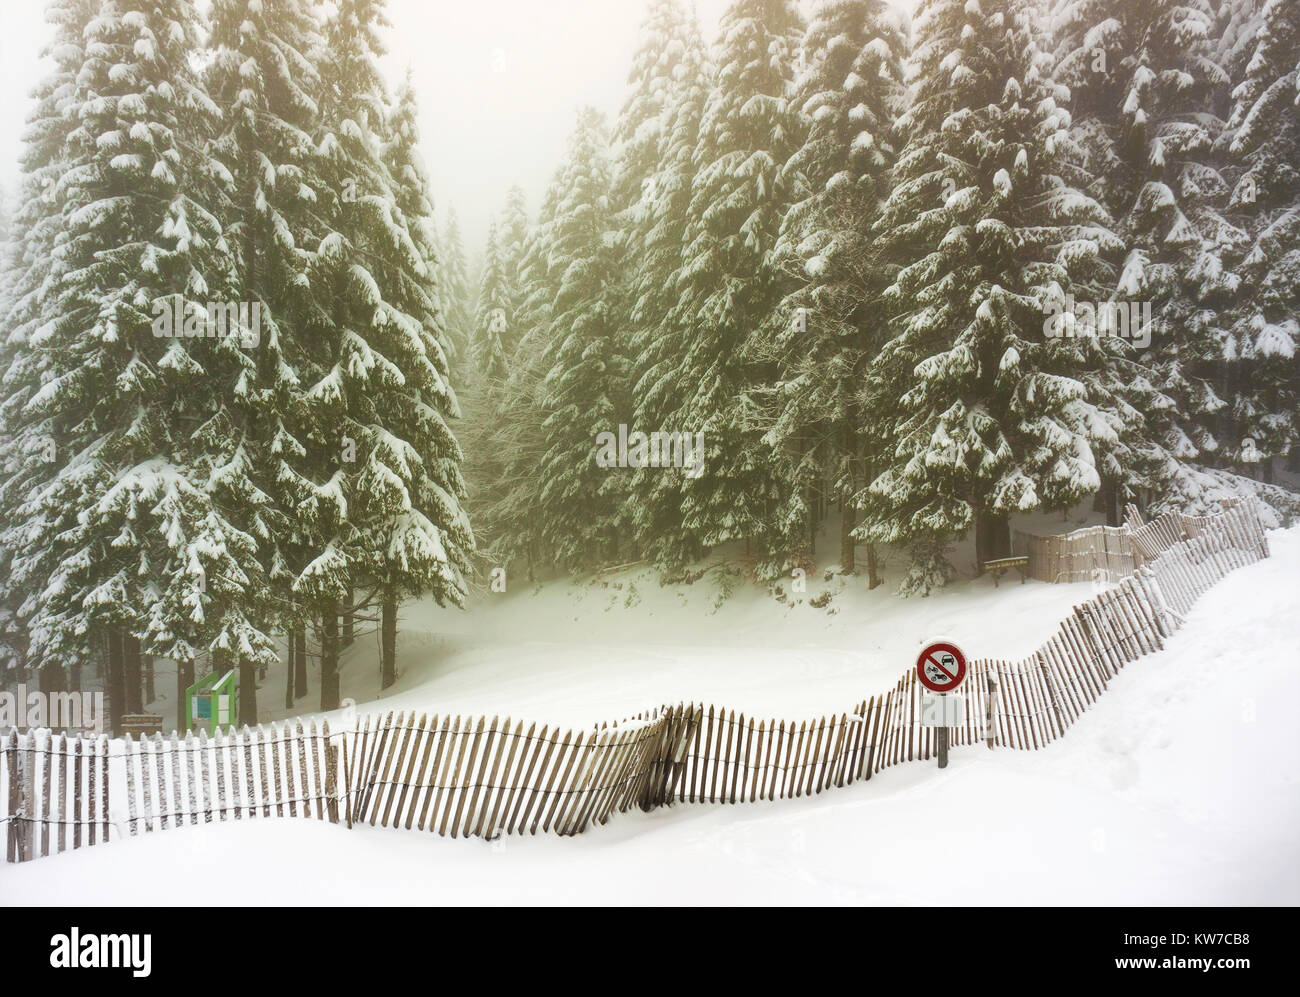 Firs forest covered with snow with a snowy fence in the foreground on a foggy and moody day of winter, Vosges, France. Stock Photo